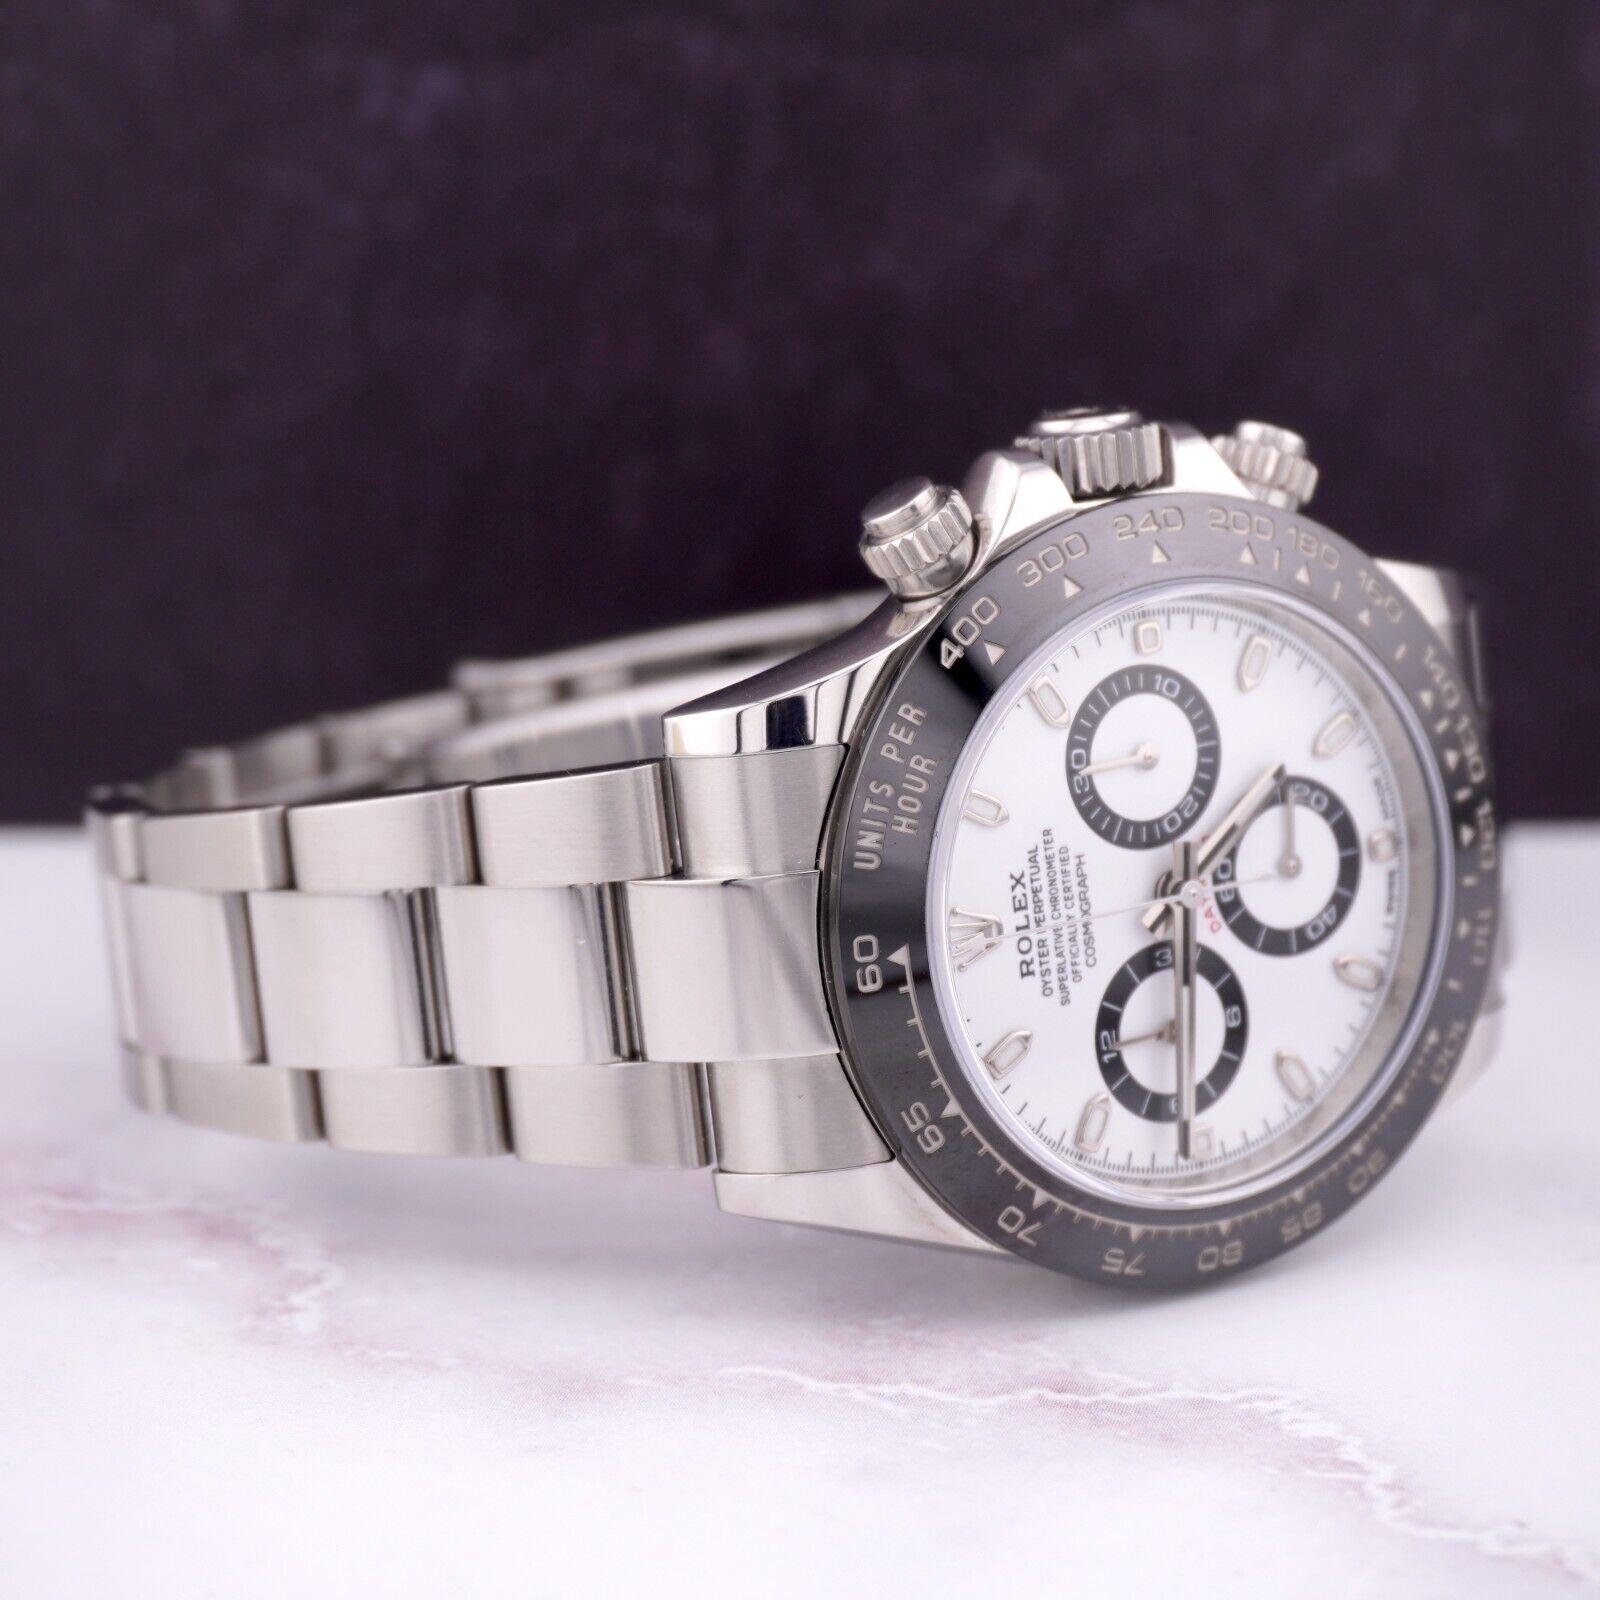 Rolex Daytona Panda 40mm Watch. A Pre-owned watch w/ Original Box and 2018 Card. Watch is 100% Authentic and Comes with Authenticity Card. Watch Reference is 116500LN and is in Excellent Condition (See Pictures). The dial color is White and Black